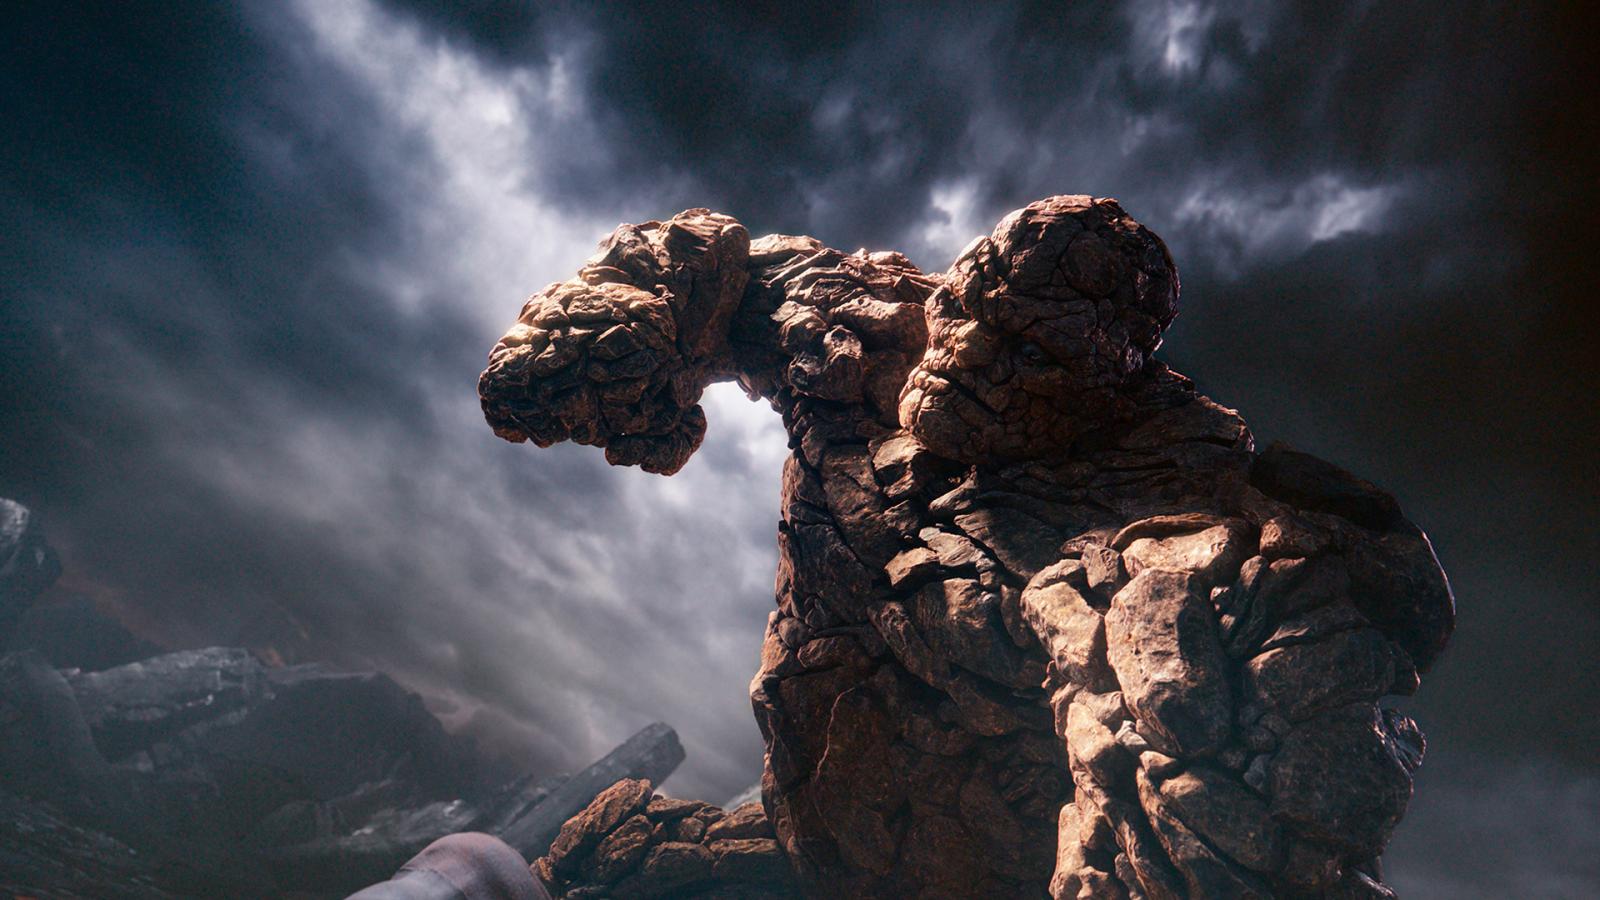 New Fantastic Four Director Just Made the Same Mistake as Everyone Before Him - image 1